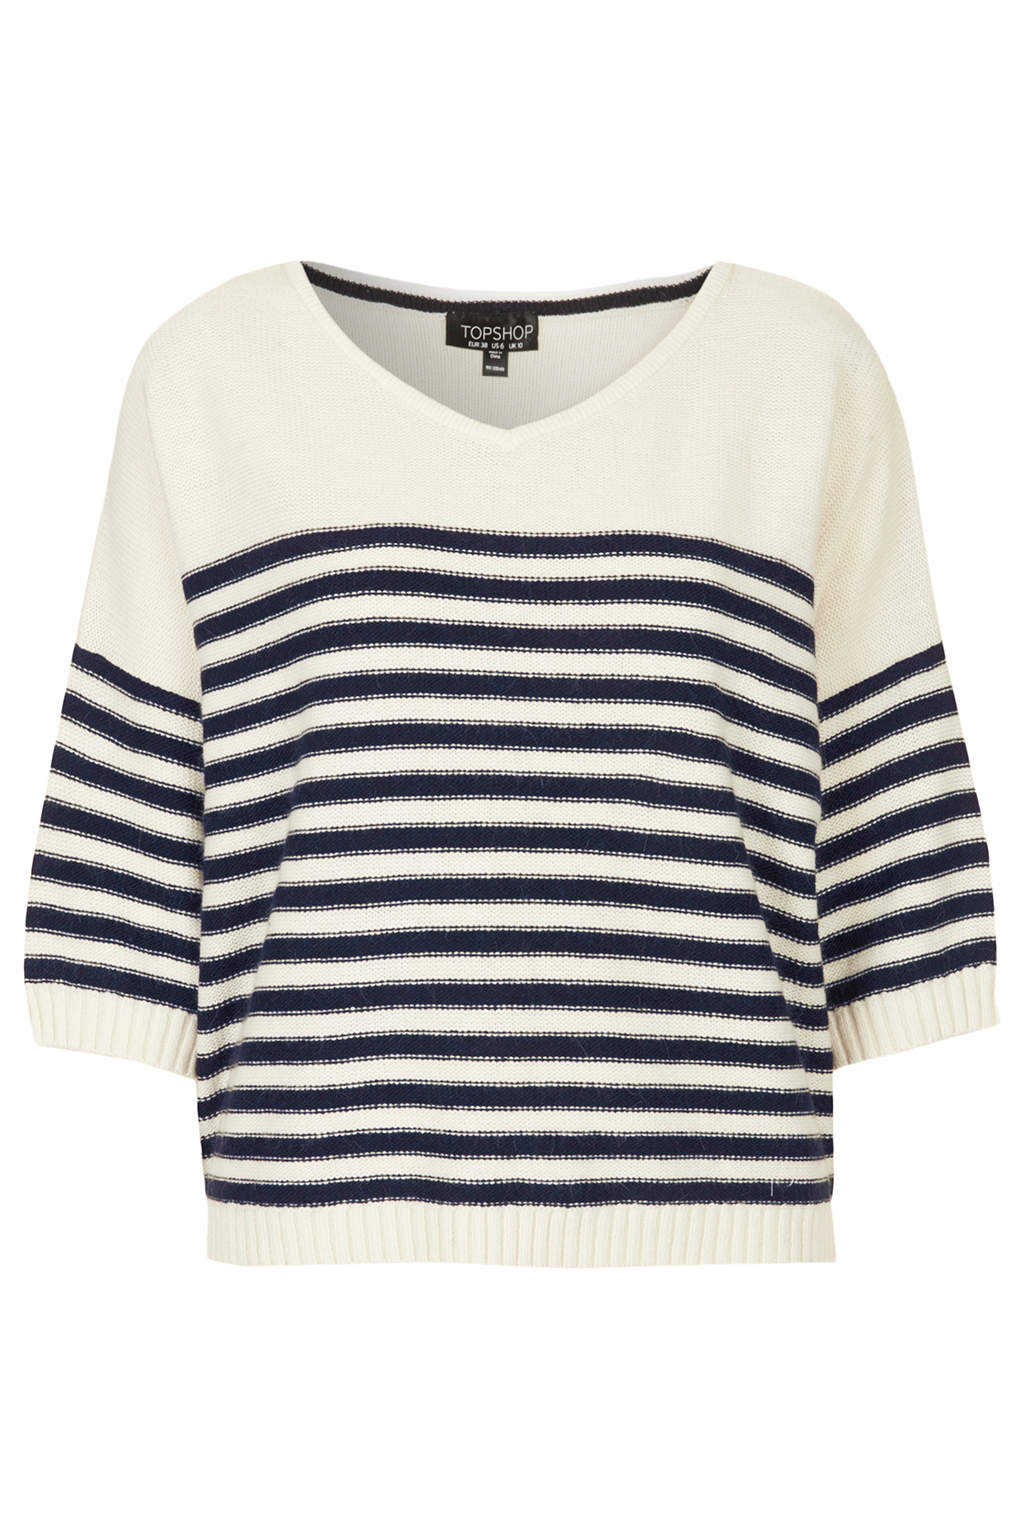 Lyst - Topshop Knitted Breton Stripe Sweater in White